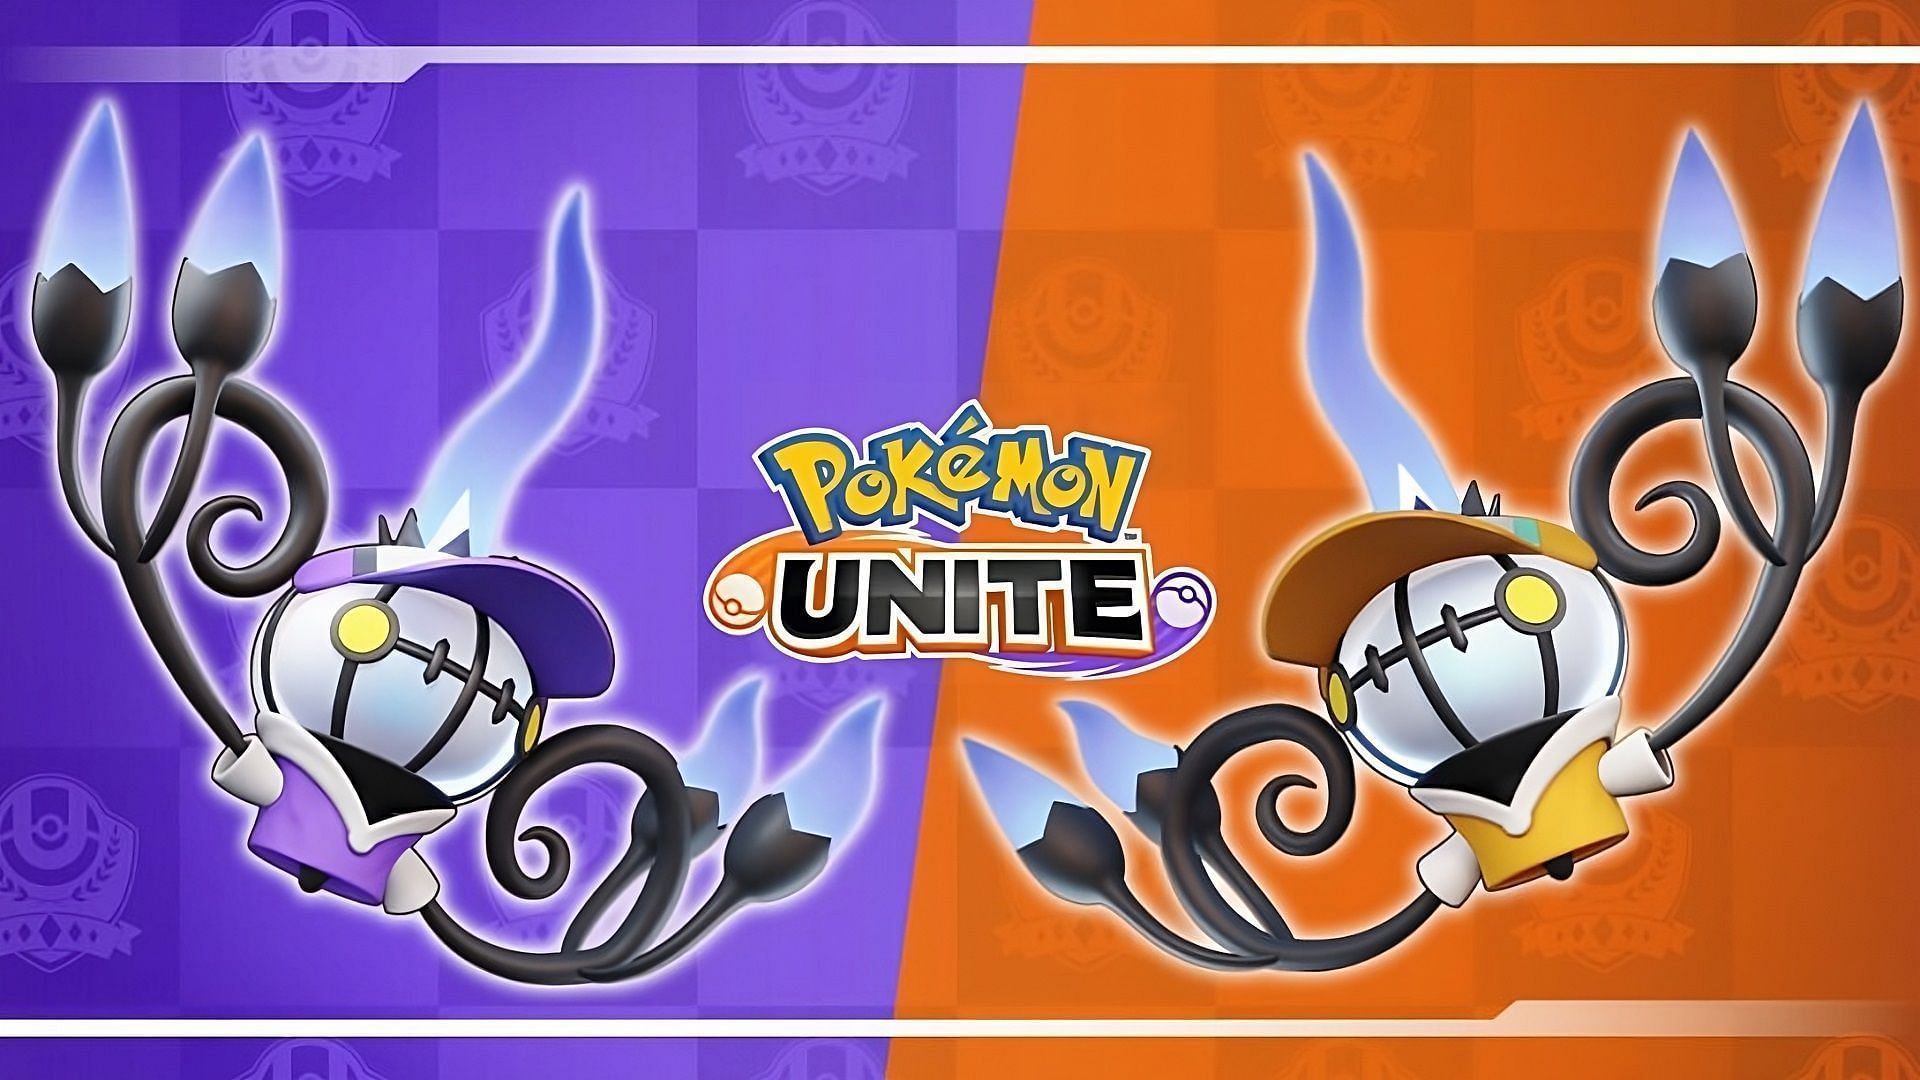 Chandelure is the latest addition to Pokemon Unite